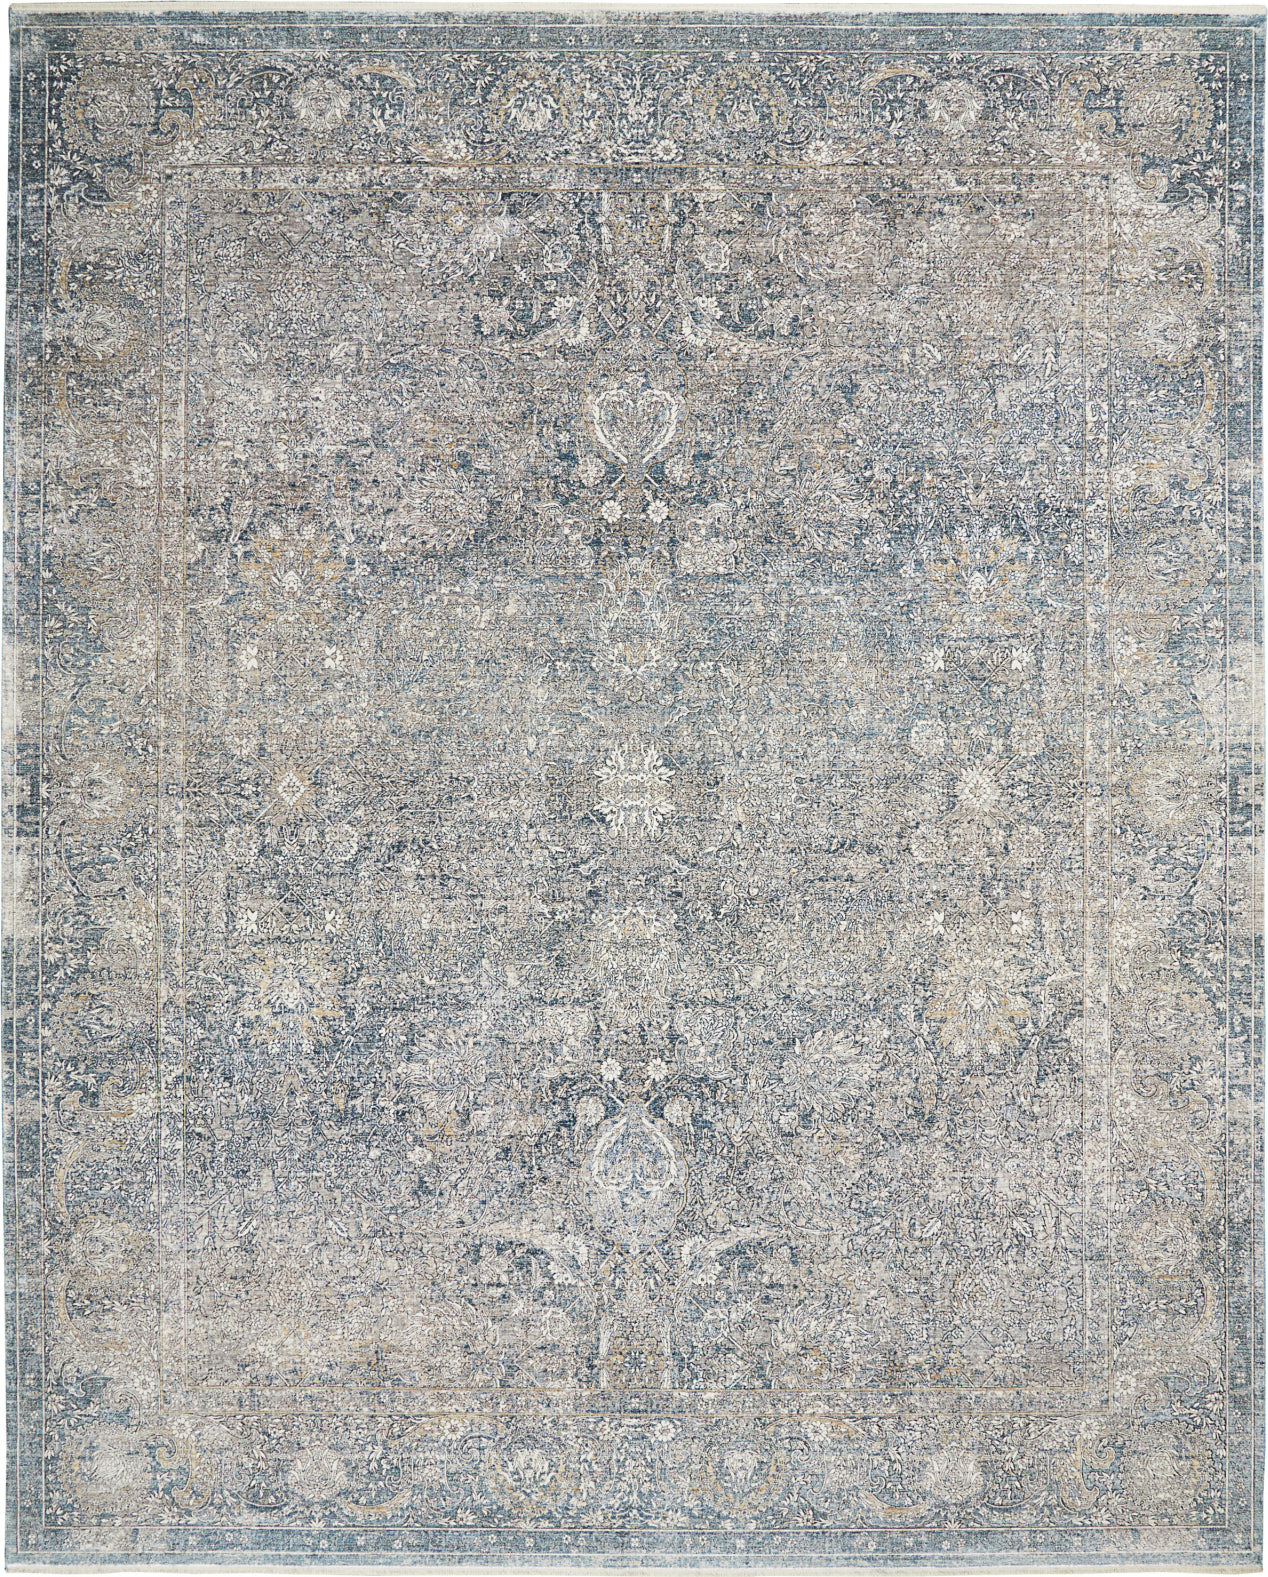 Starry Nights STN01 Cream Blue Area Rug by Nourison Main Image 8'6'' x 11'6'' Size Main Image